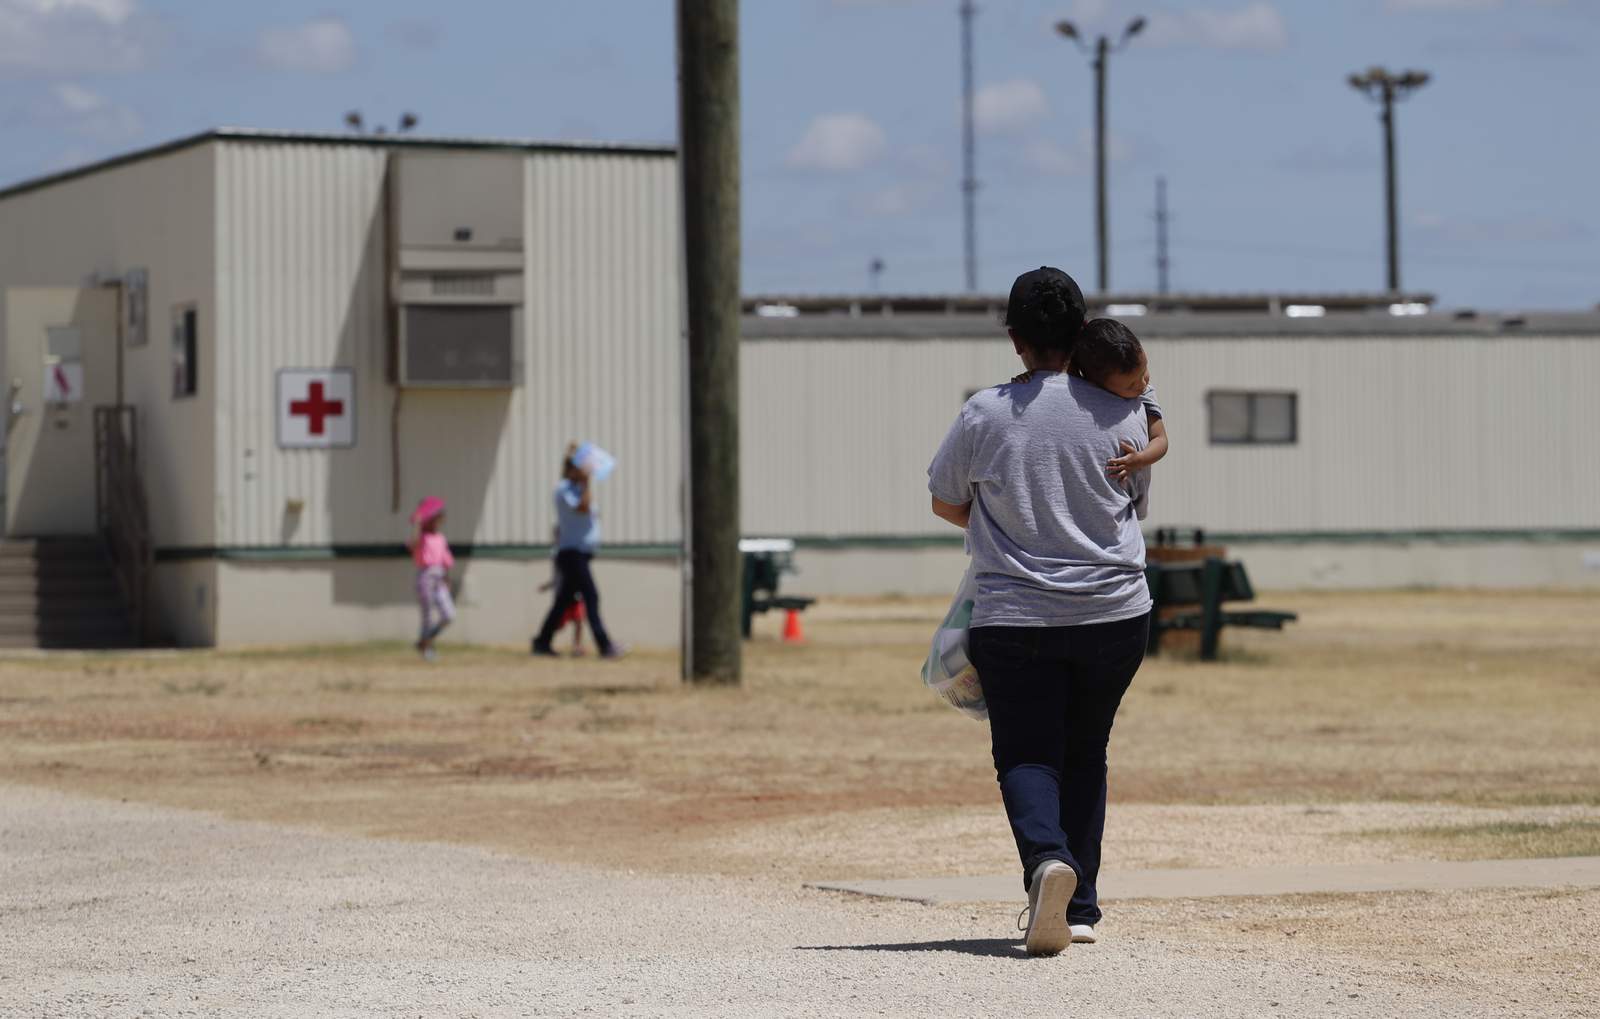 US plans family deportations, including girl with broken arm